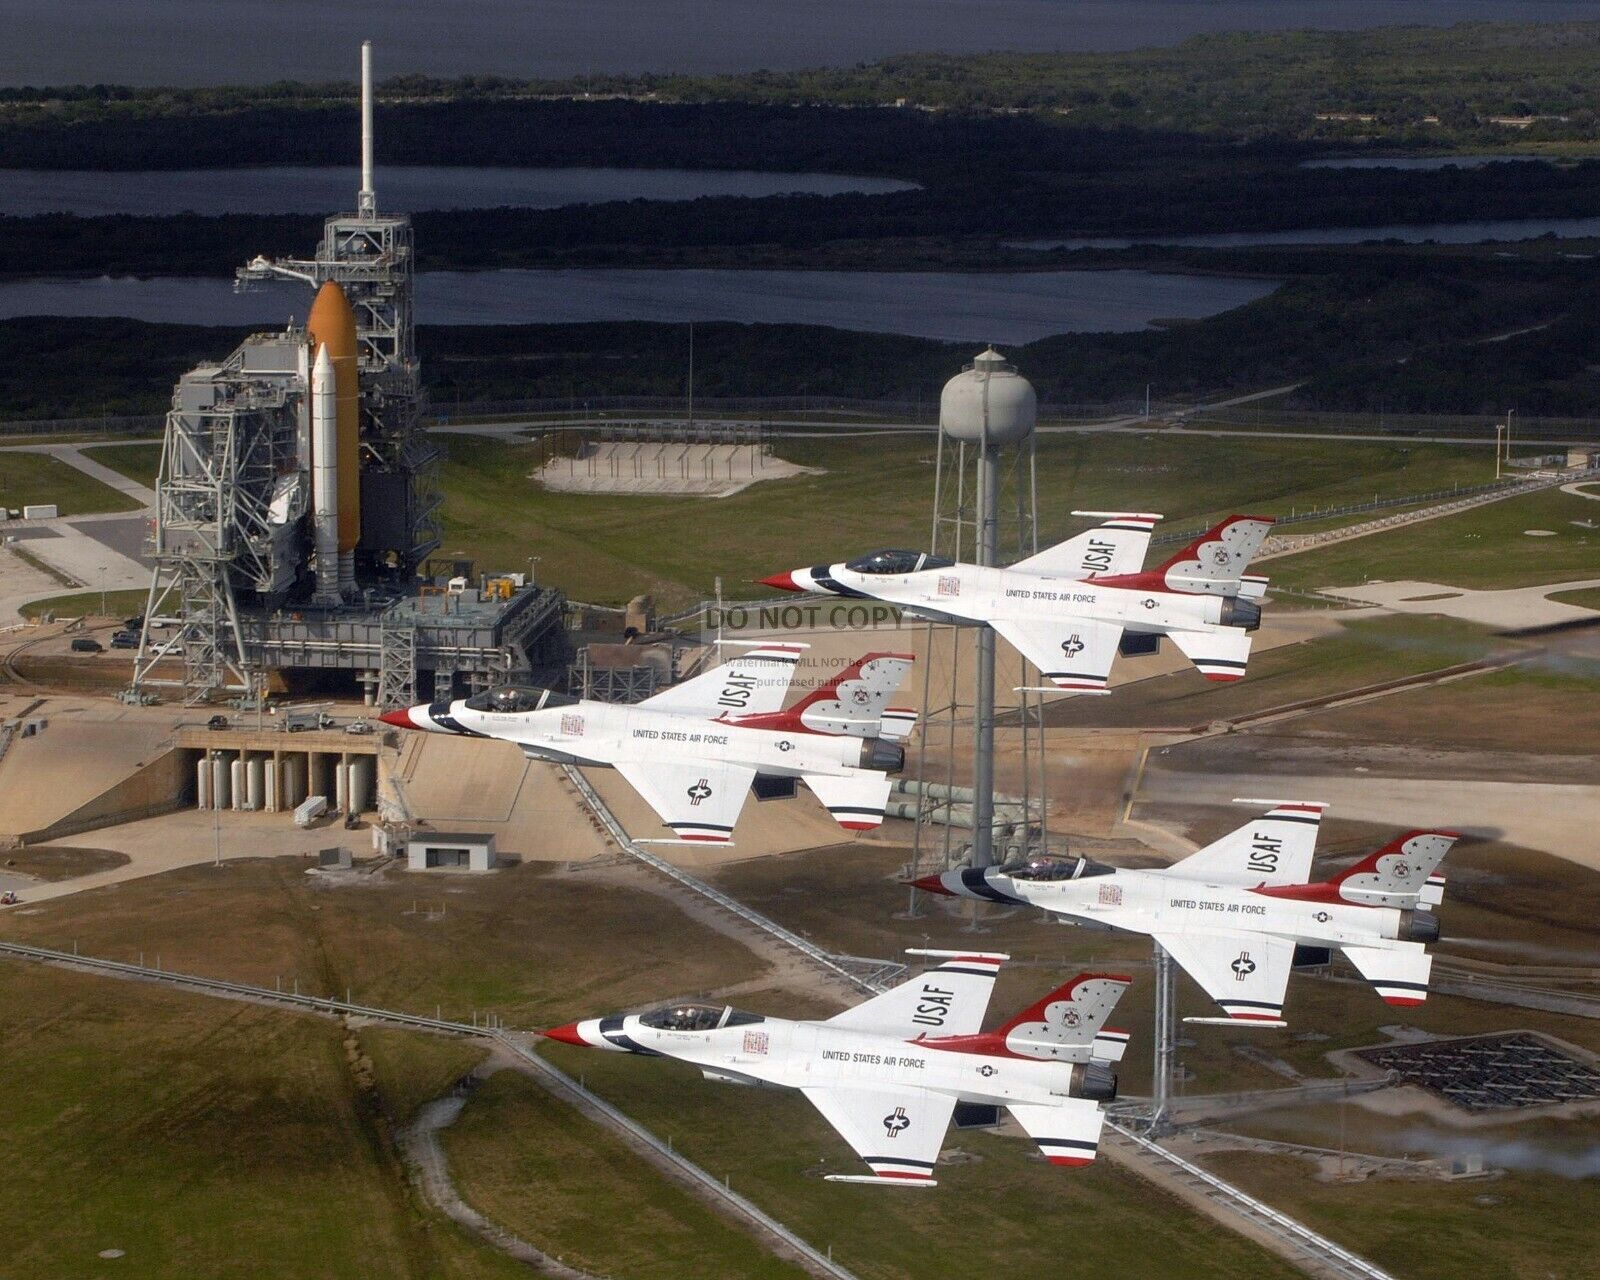 USAF THUNDERBIRDS FLY PAST SHUTTLE ENDEAVOUR AT LAUNCH PAD - 8X10 PHOTO (EE-117)